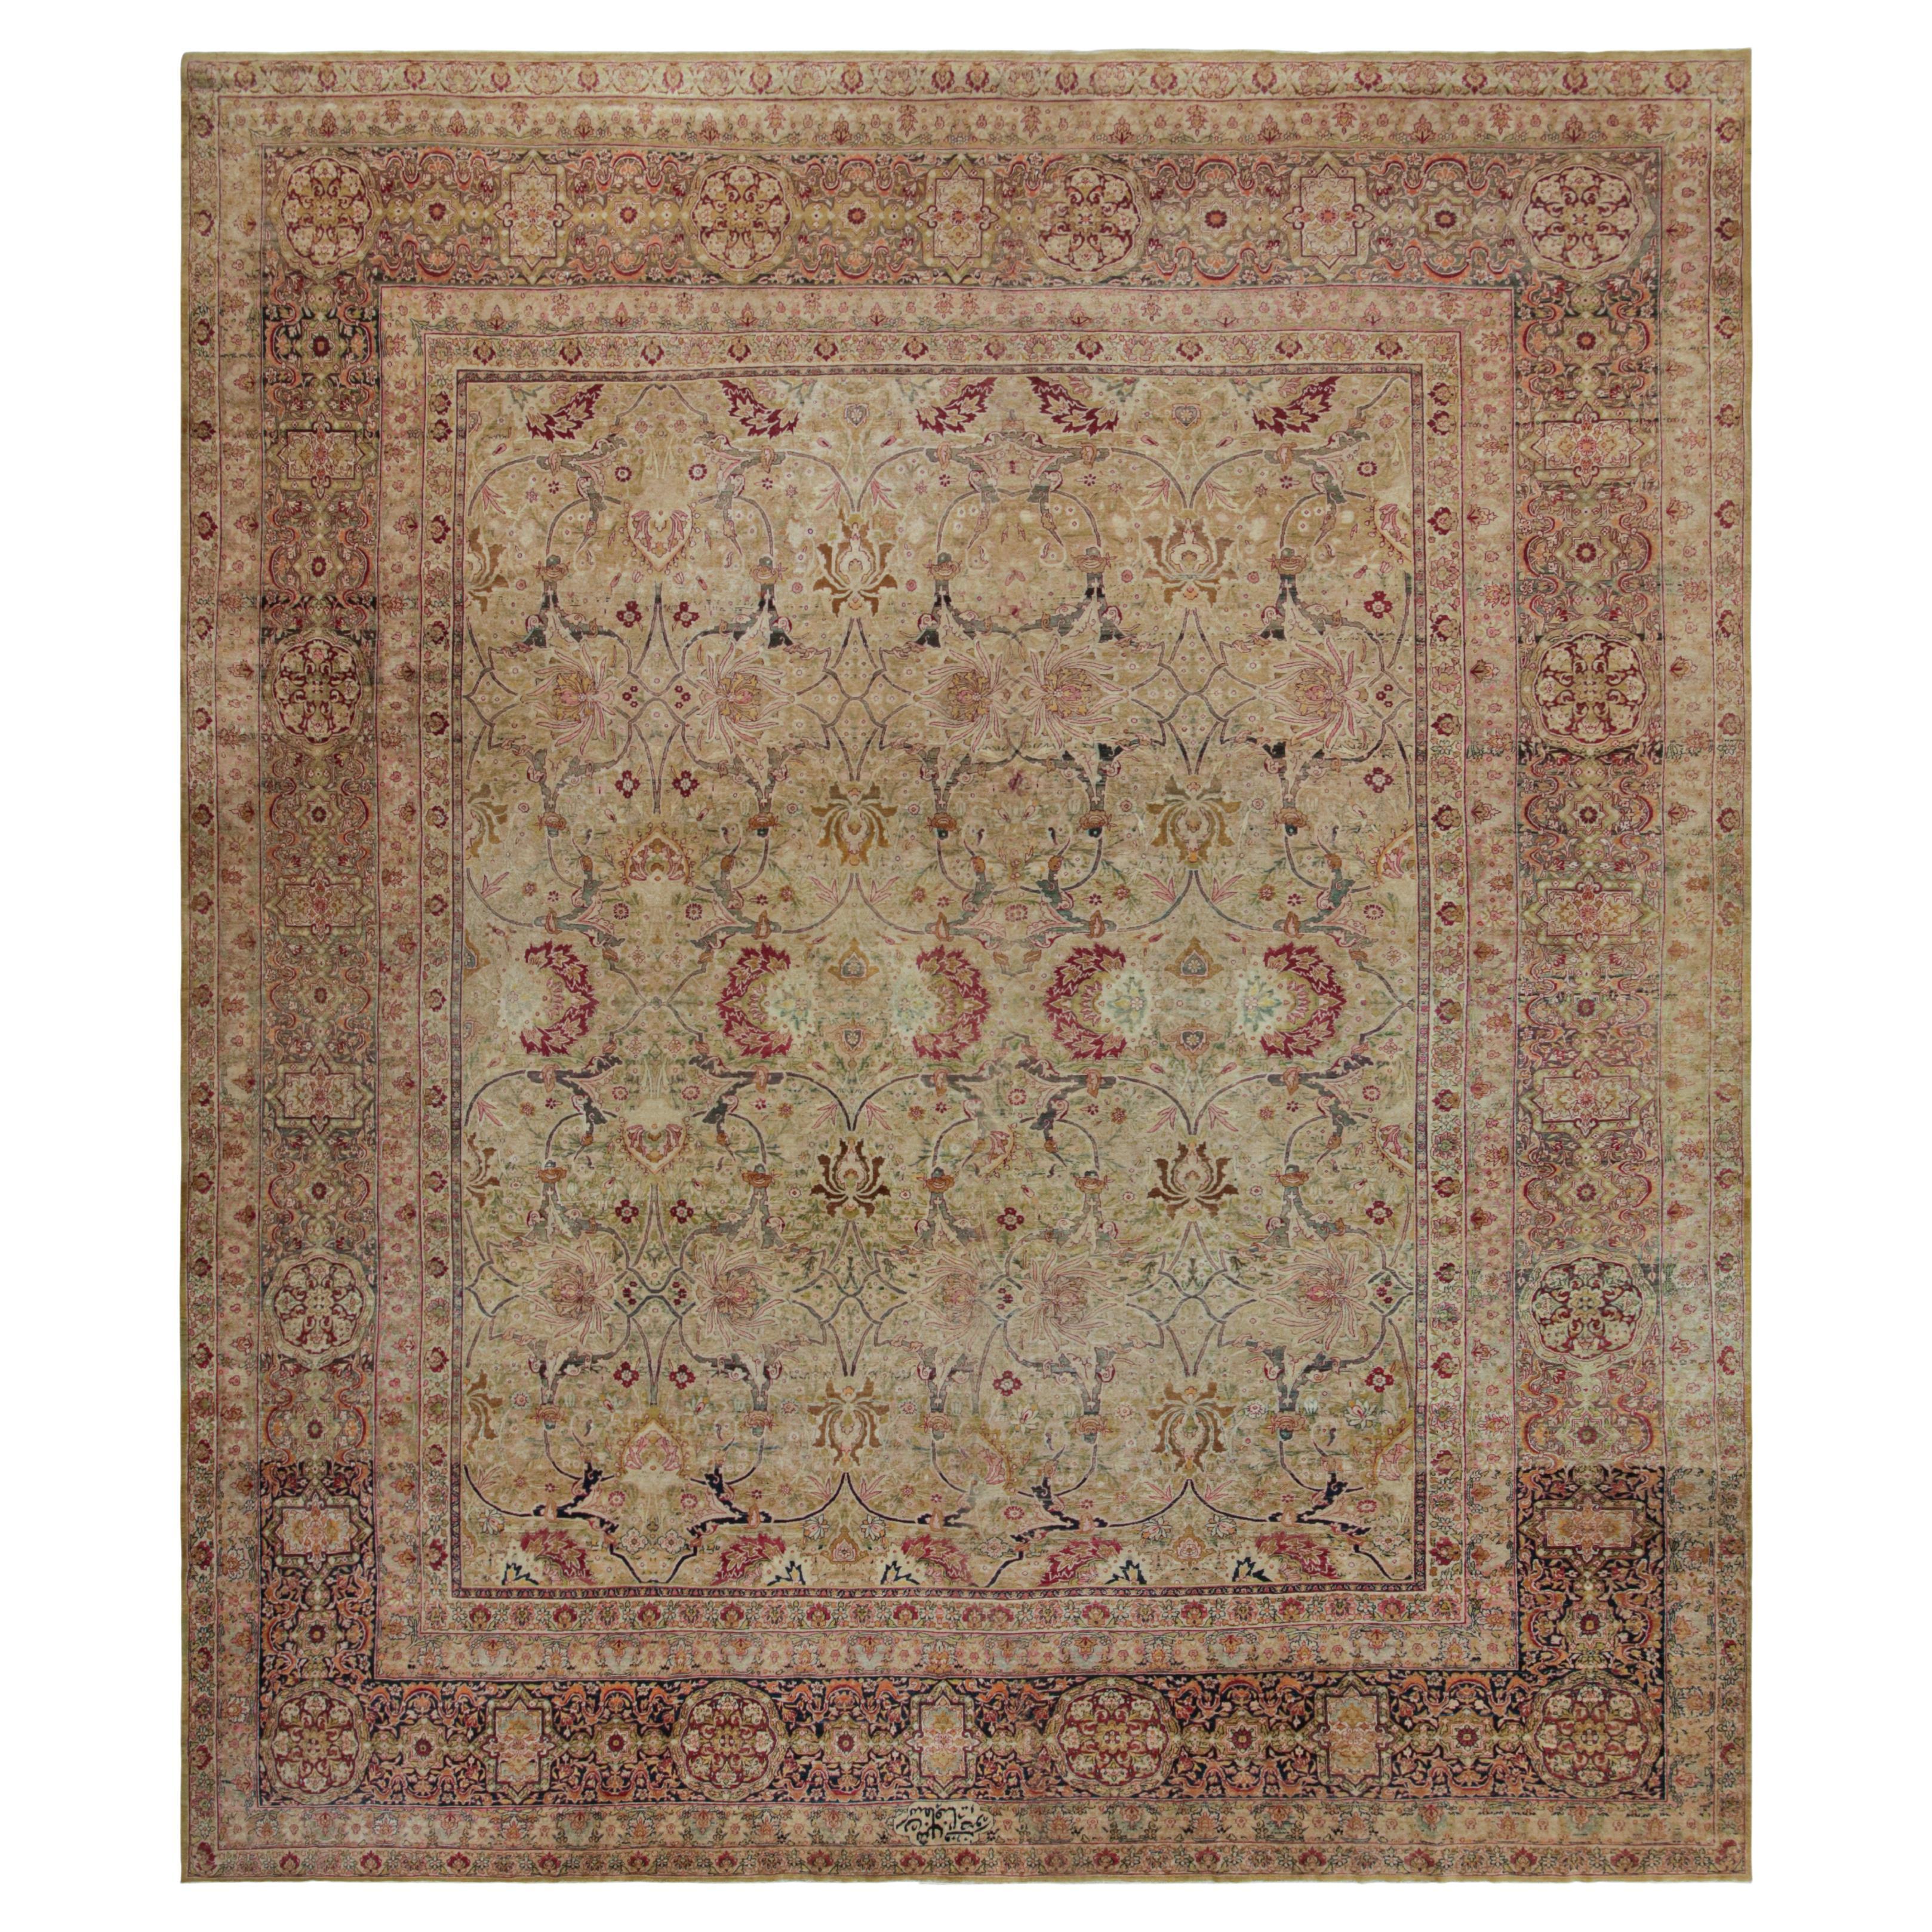 Antique Persian Kerman Lavar Rug with Floral Patterns, from Rug & Kilim